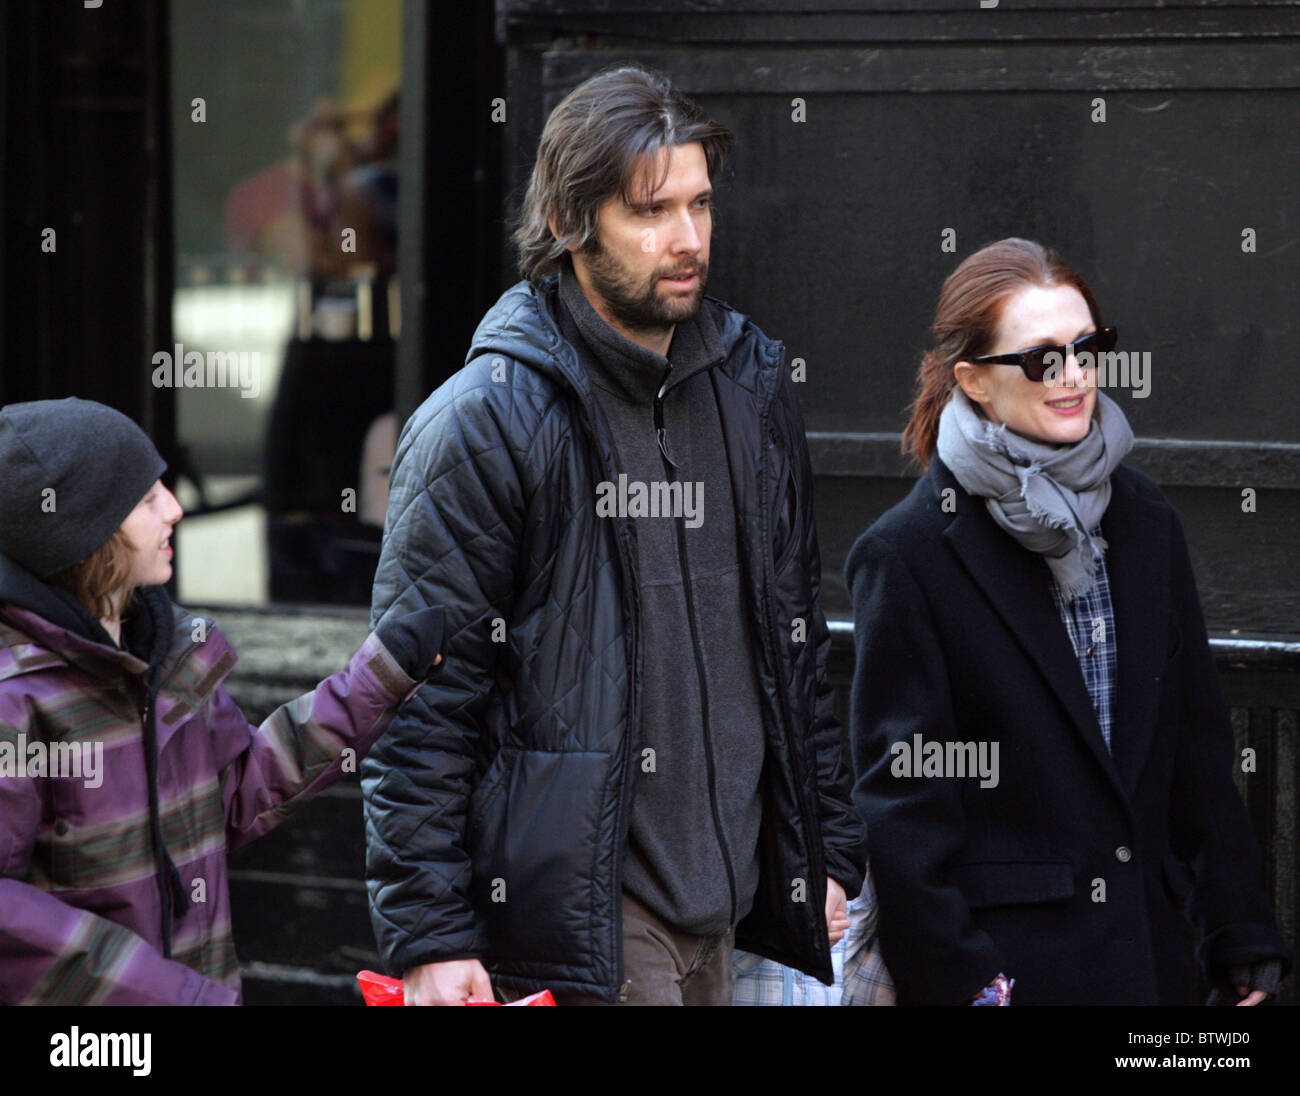 Julianne Moore and Bart Freundlich with Their Children in SOHO Stock Photo